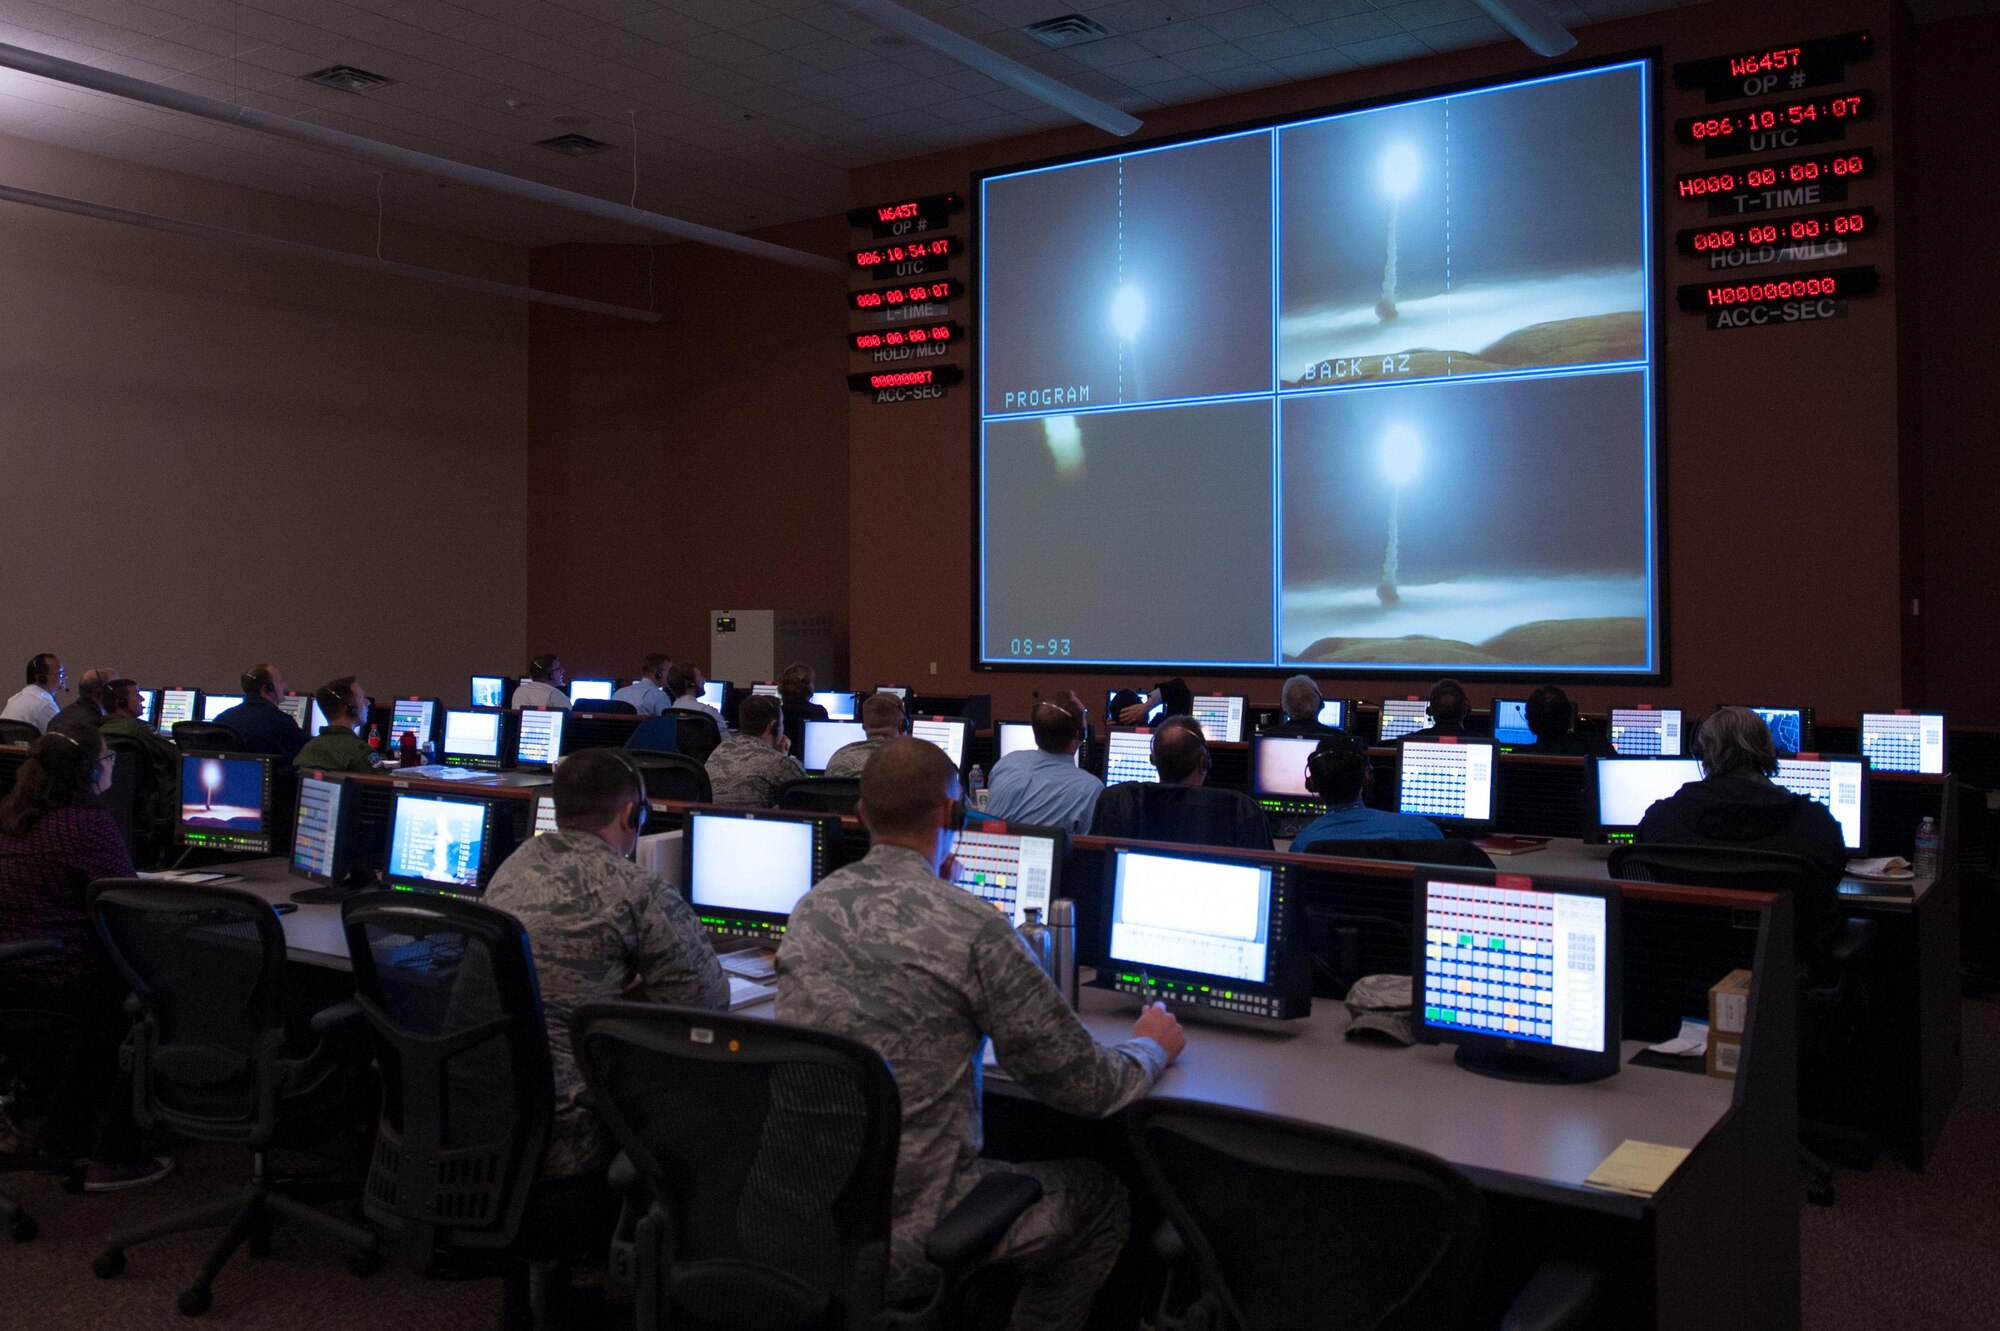 Members of the 576th Flight Test Squadron monitor an operational test launch of an unarmed Minuteman III missile March 27, 2015, at Vandenberg Air Force Base, Calif. The intercontinental ballistic missile test launch program demonstrates the operational credibility of the Minuteman III and ensures the United States’ ability to maintain a strong, credible nuclear deterrent as a key element of U.S. national security and the security of U.S. allies and partners. (U.S. Air Force photo/Michael Peterson)